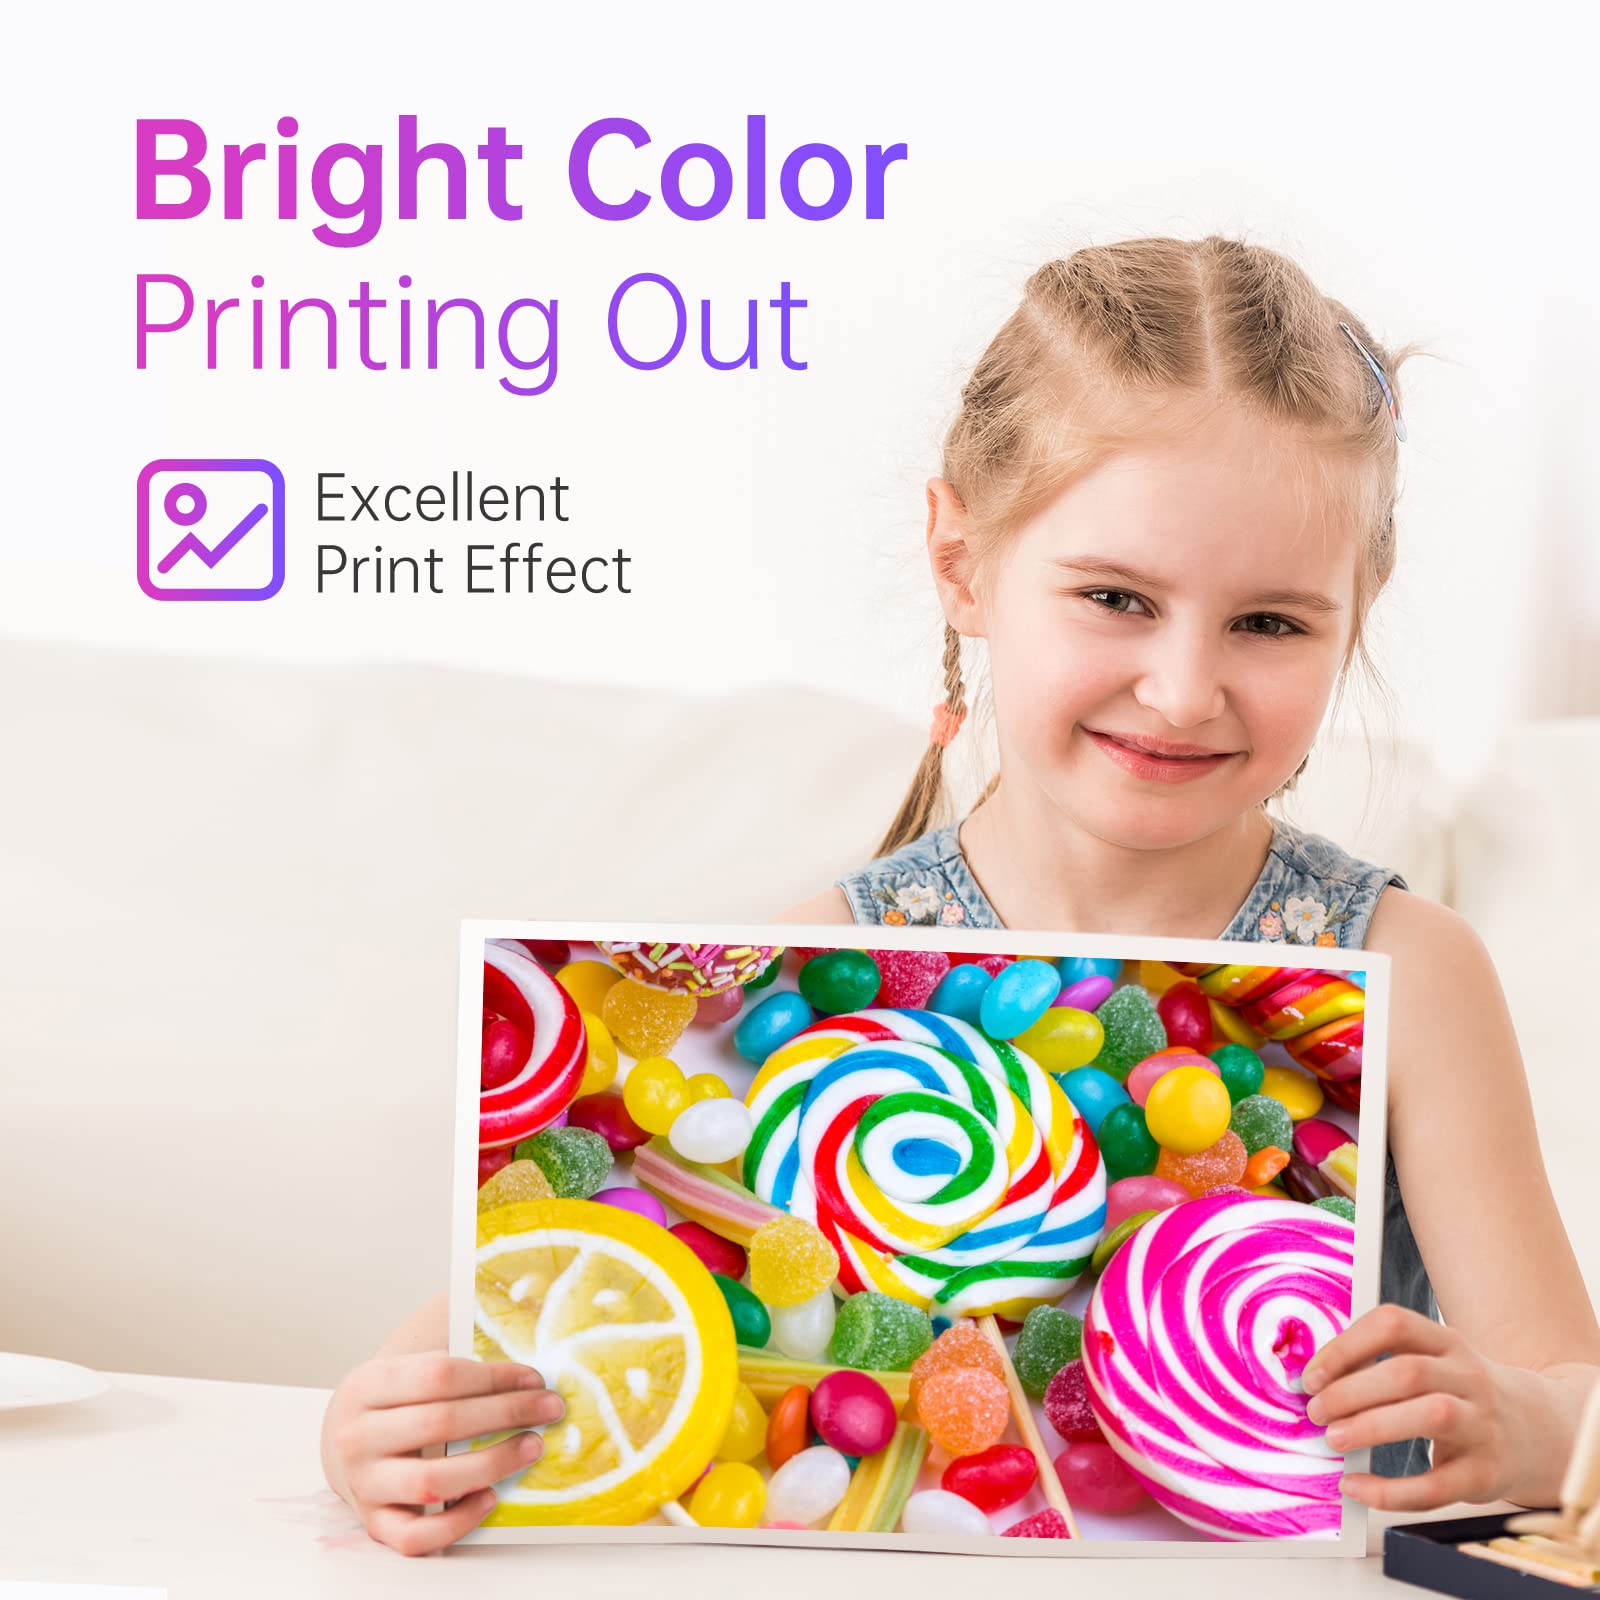 Bright Color Printing from HP 62XL Ink Cartridges:Young girl smiling while holding a brightly colored printout showcasing the vibrant print quality of HP 62XL ink cartridges, emphasizing excellent print effects.